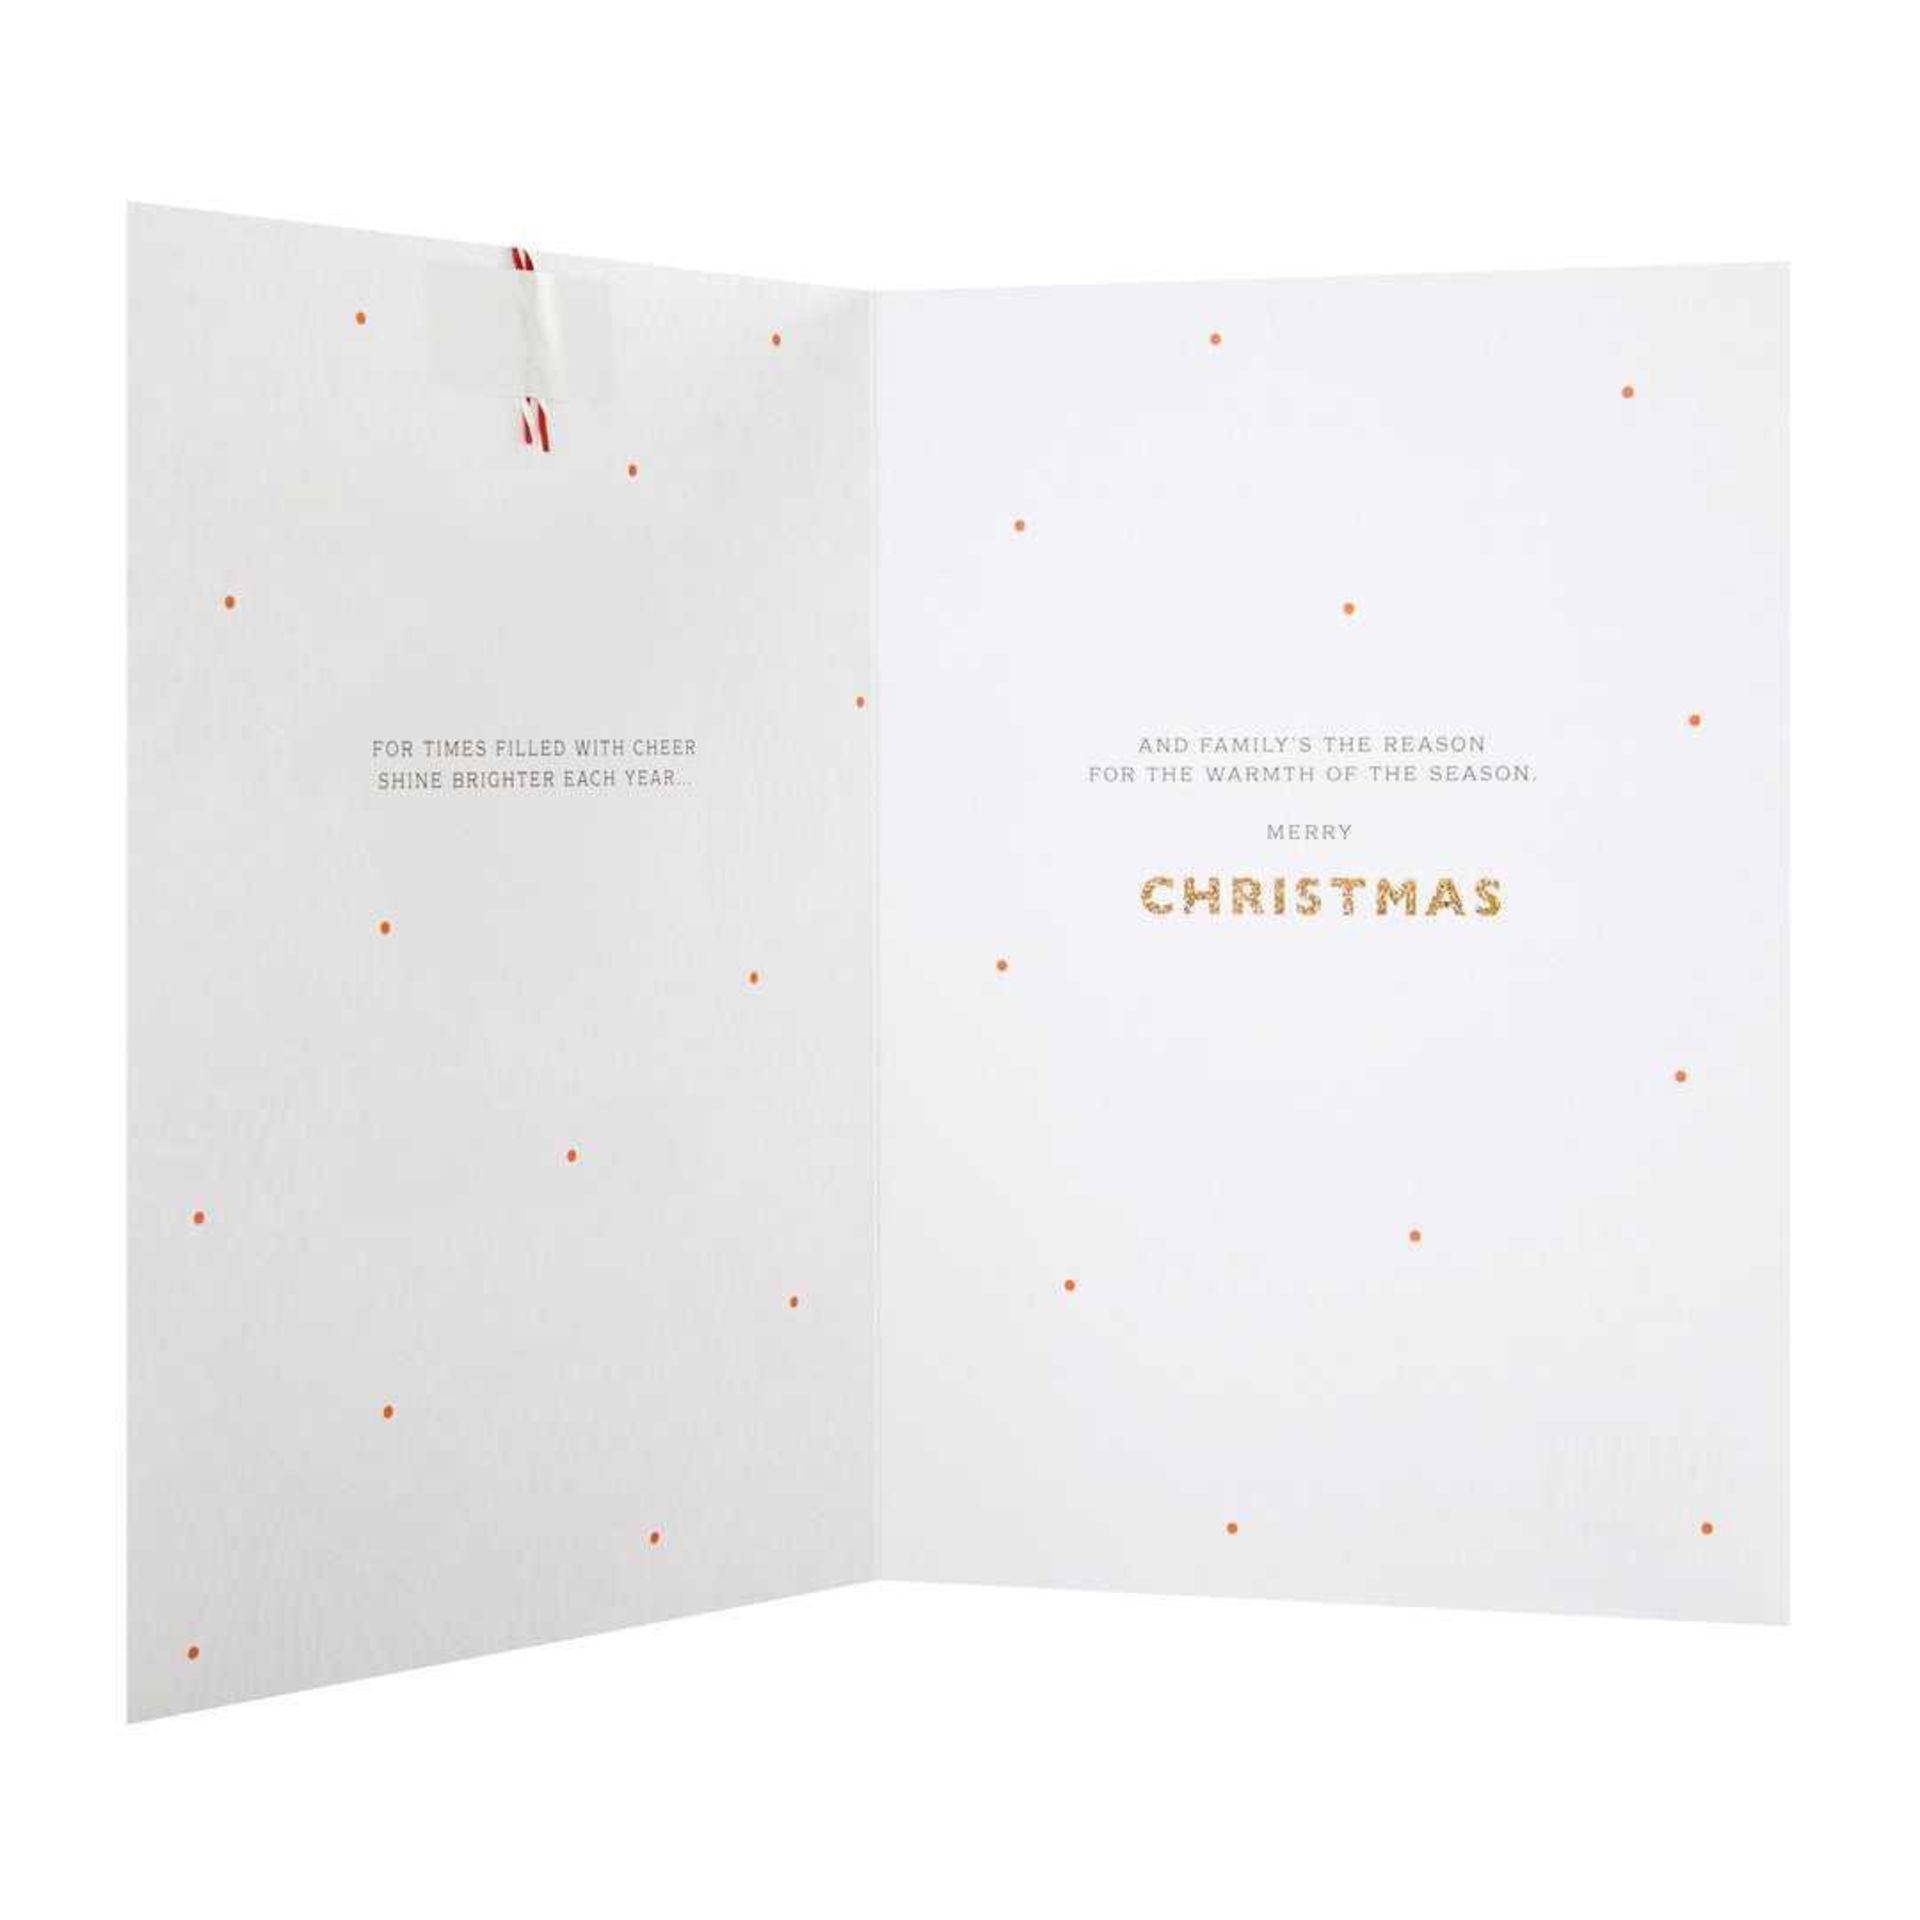 RRP £530 Brand New And Sealed (200 Items) Christmas Card For Mum And Dad From Hallmark - Contemporar - Image 2 of 4